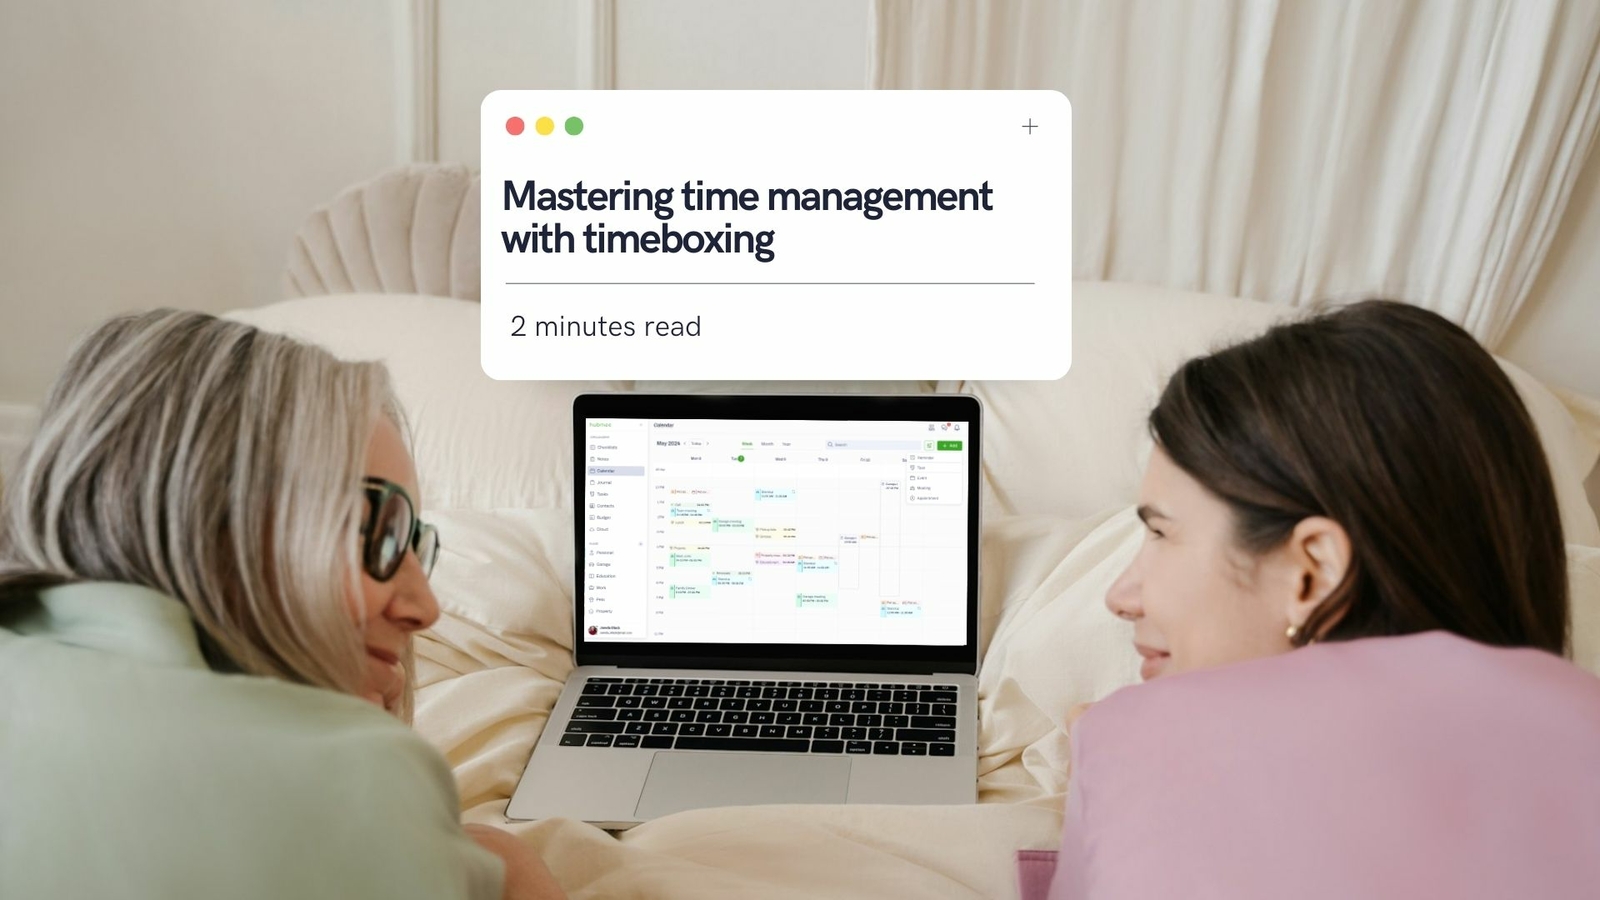 Mastering time management with timeboxing